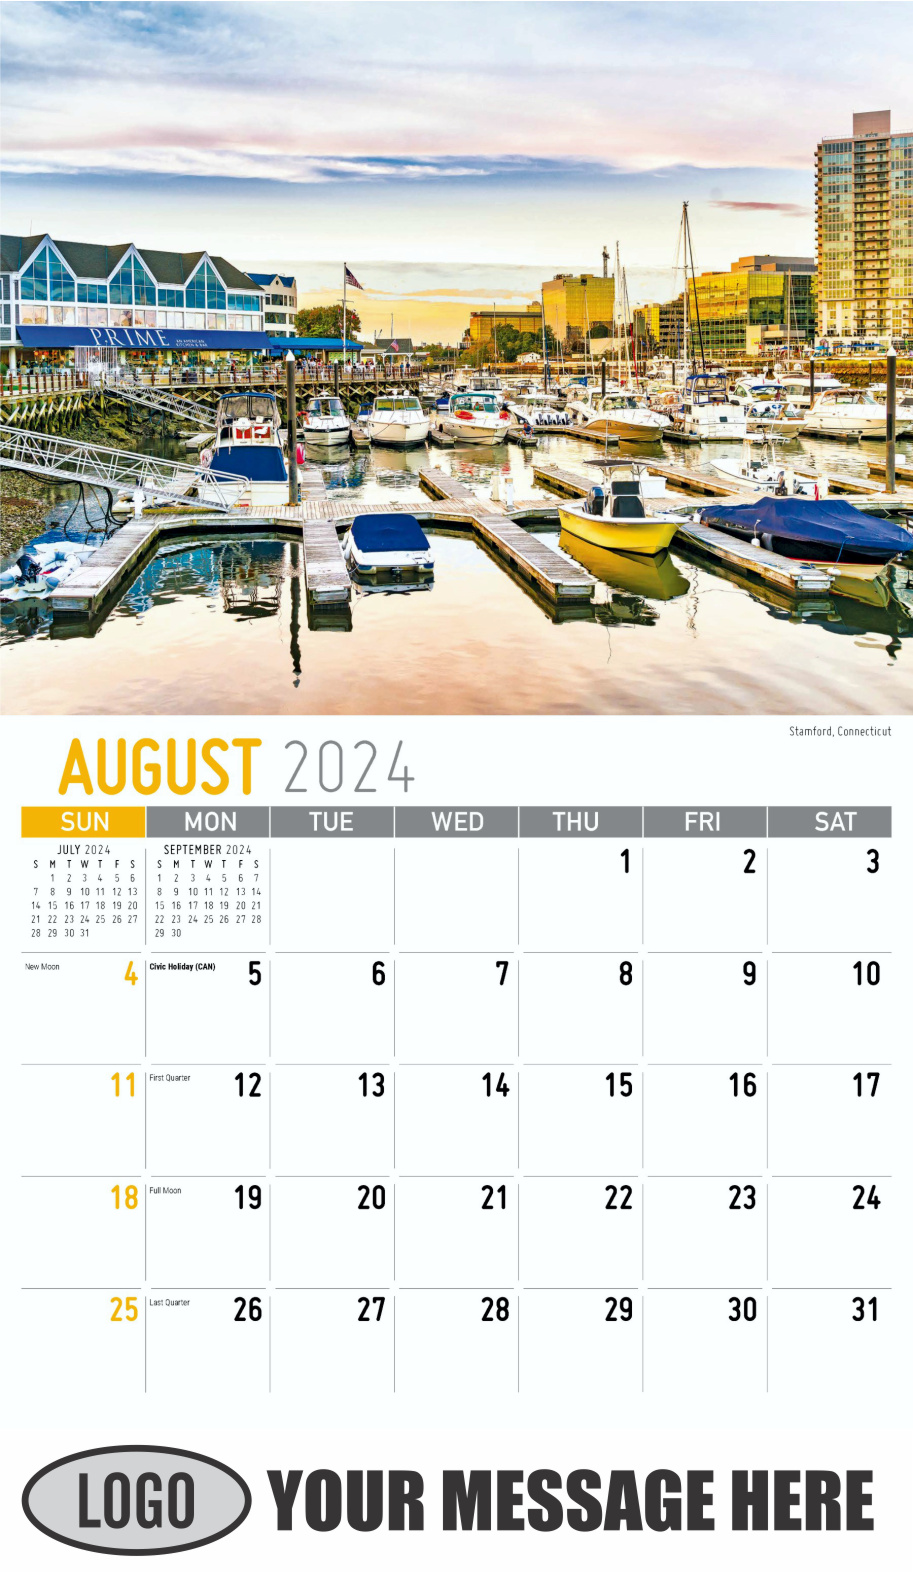 Scenes of New England 2024 Business Advertising Wall Calendar - August